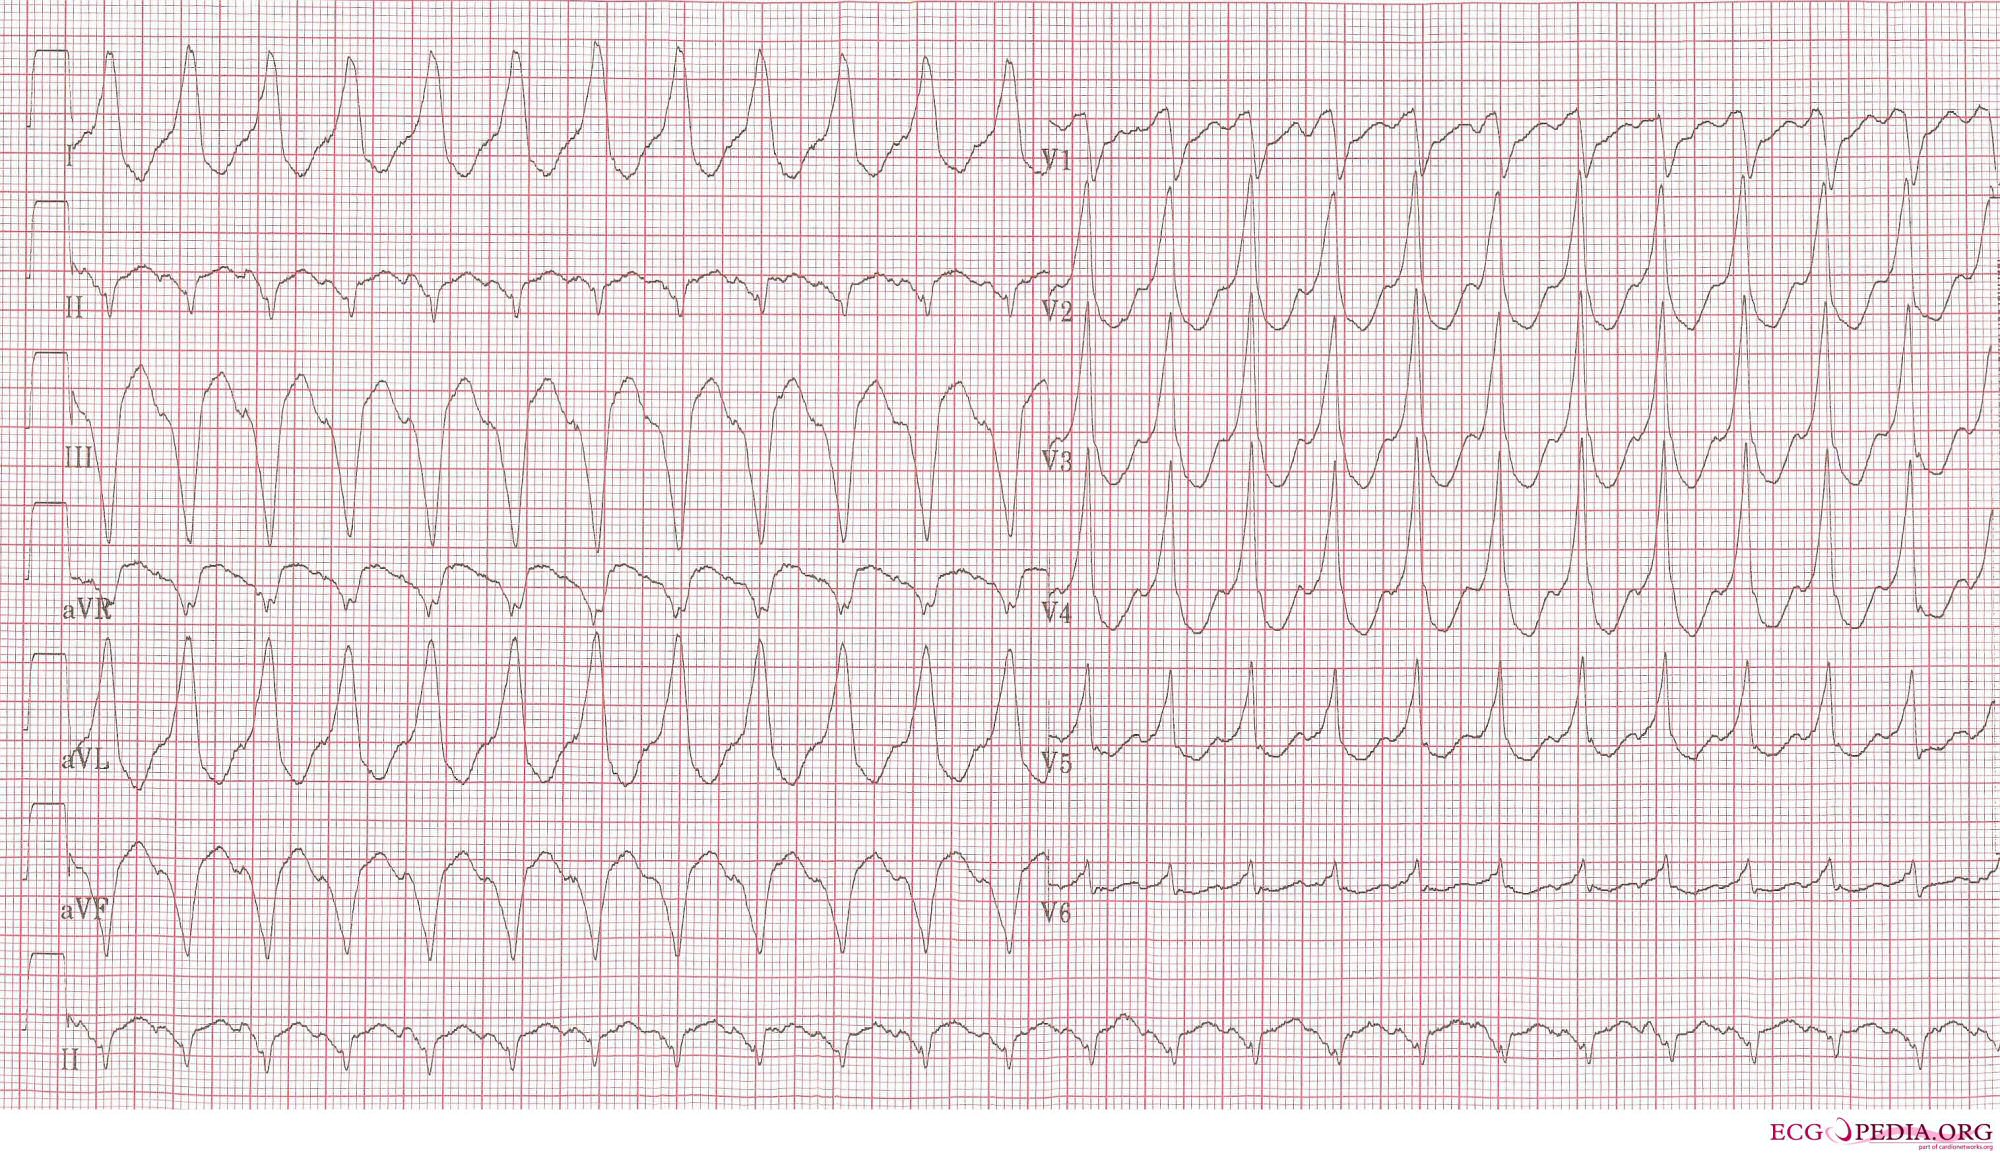 Ventricular tachycardia of 140 bpm with a left bundle branch block pattern and left heart axis.